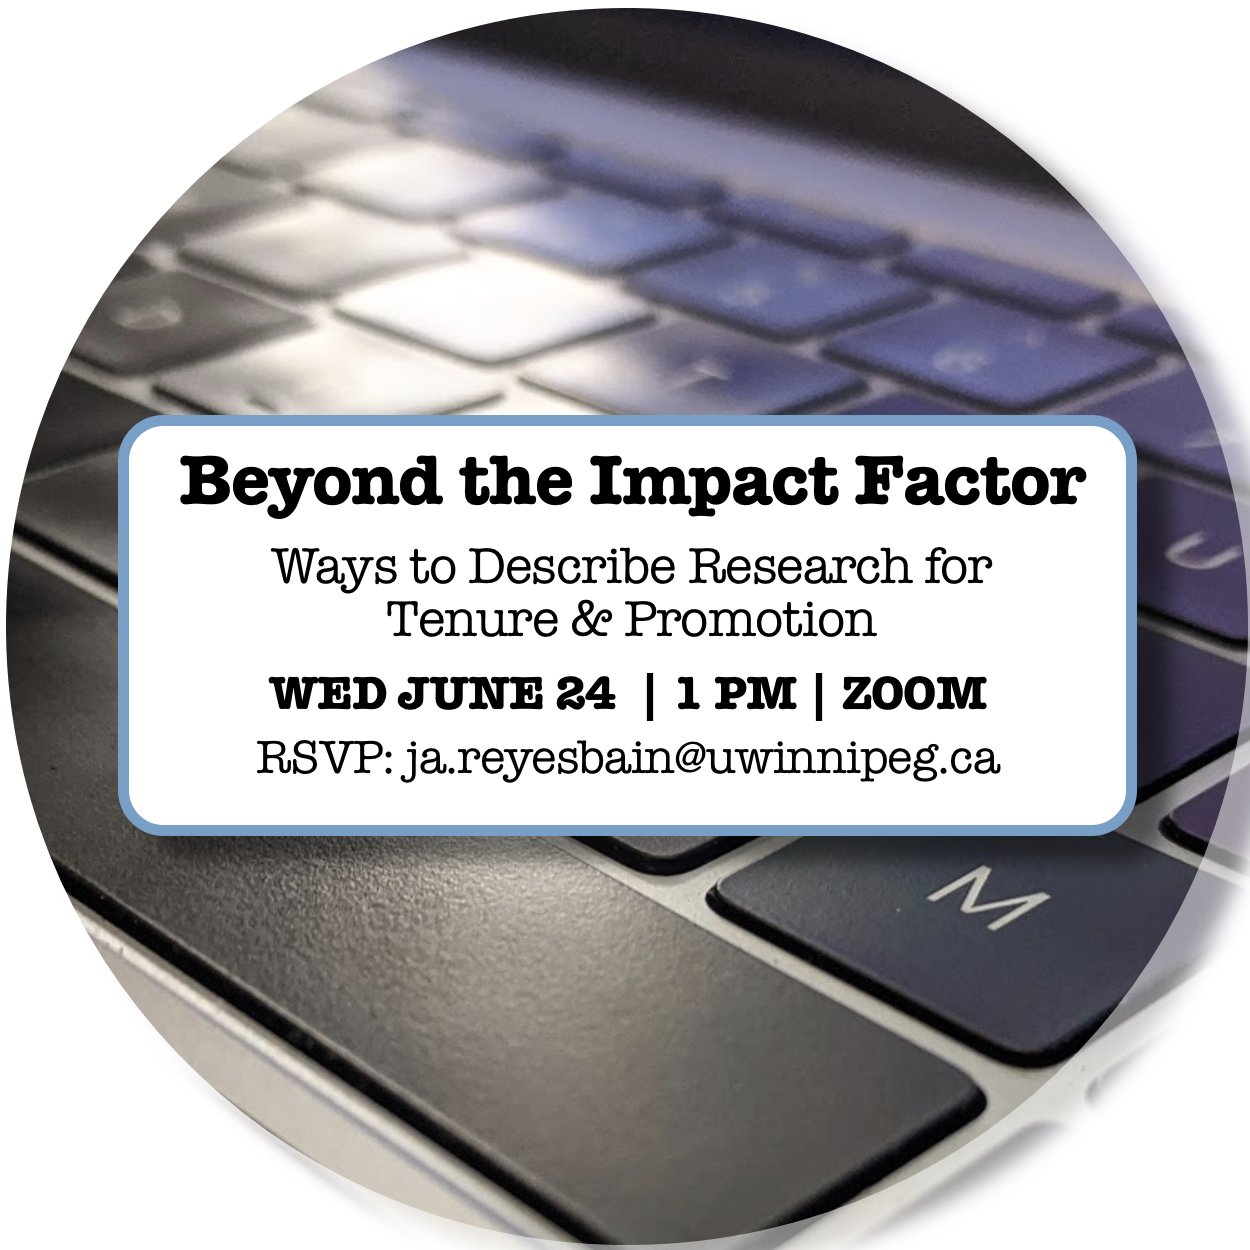 Graphic Text: Beyond the Impact Factor